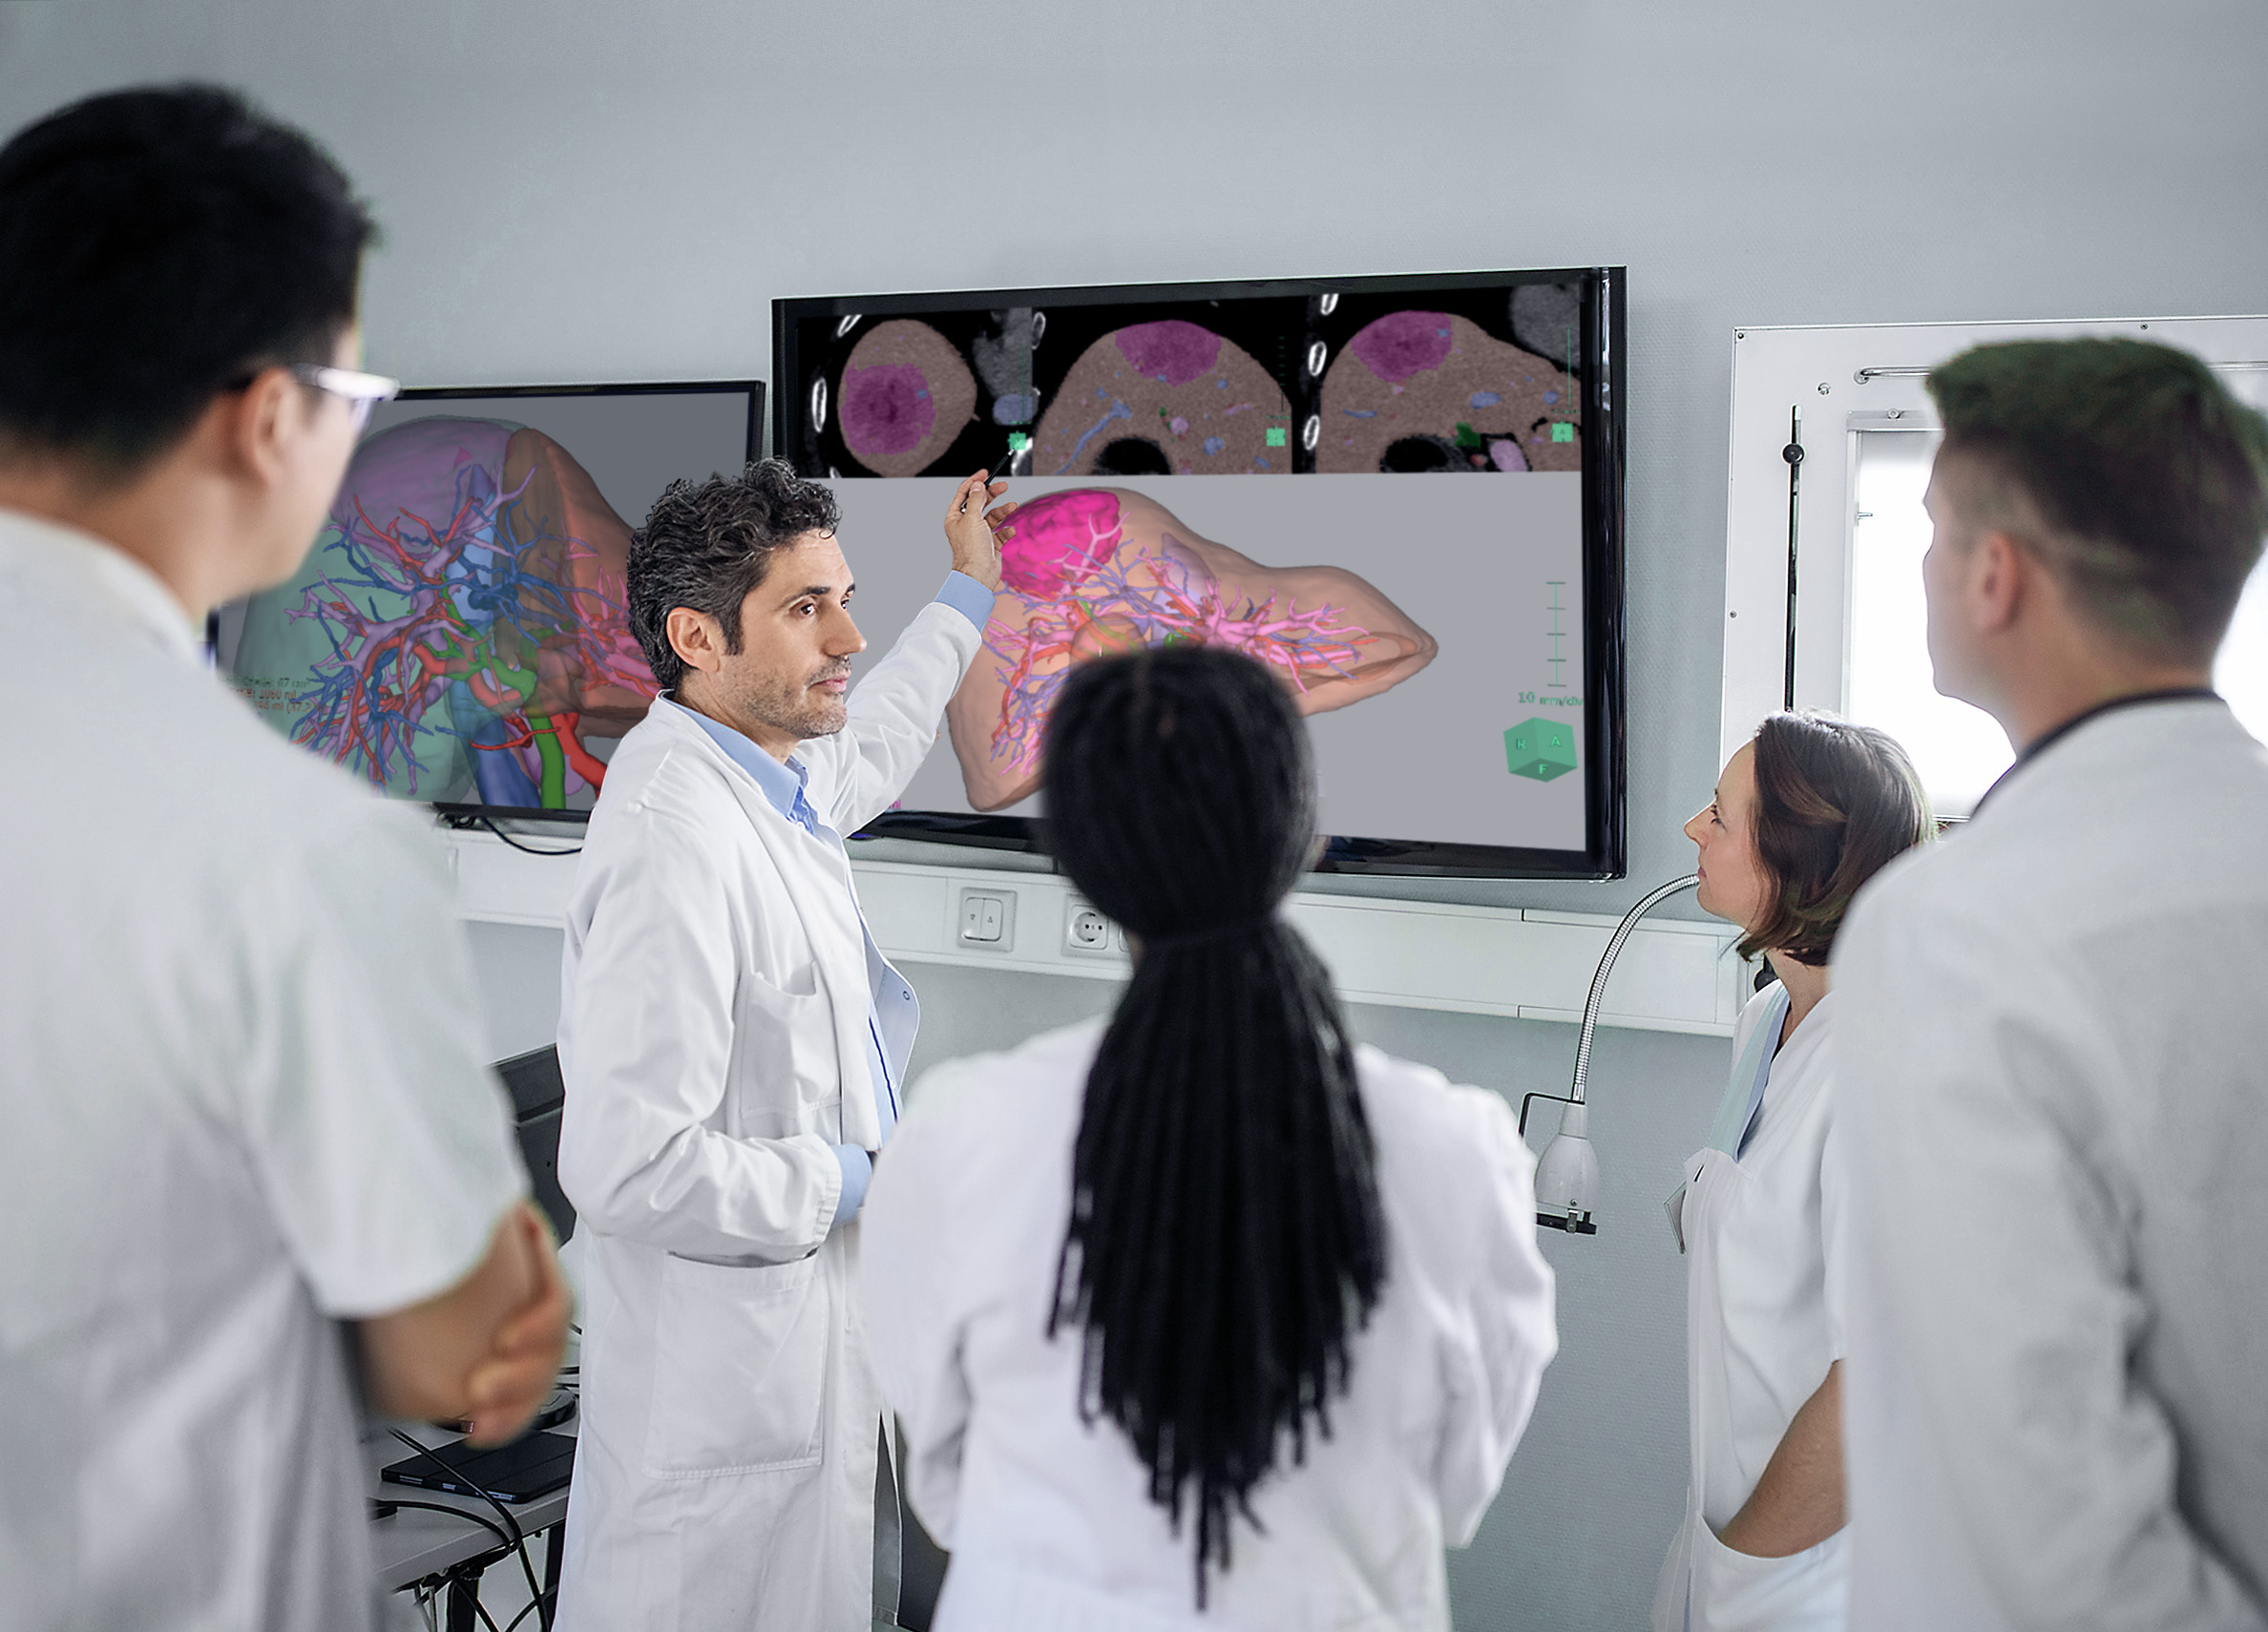 Doctors Evaluating Medical Imagery